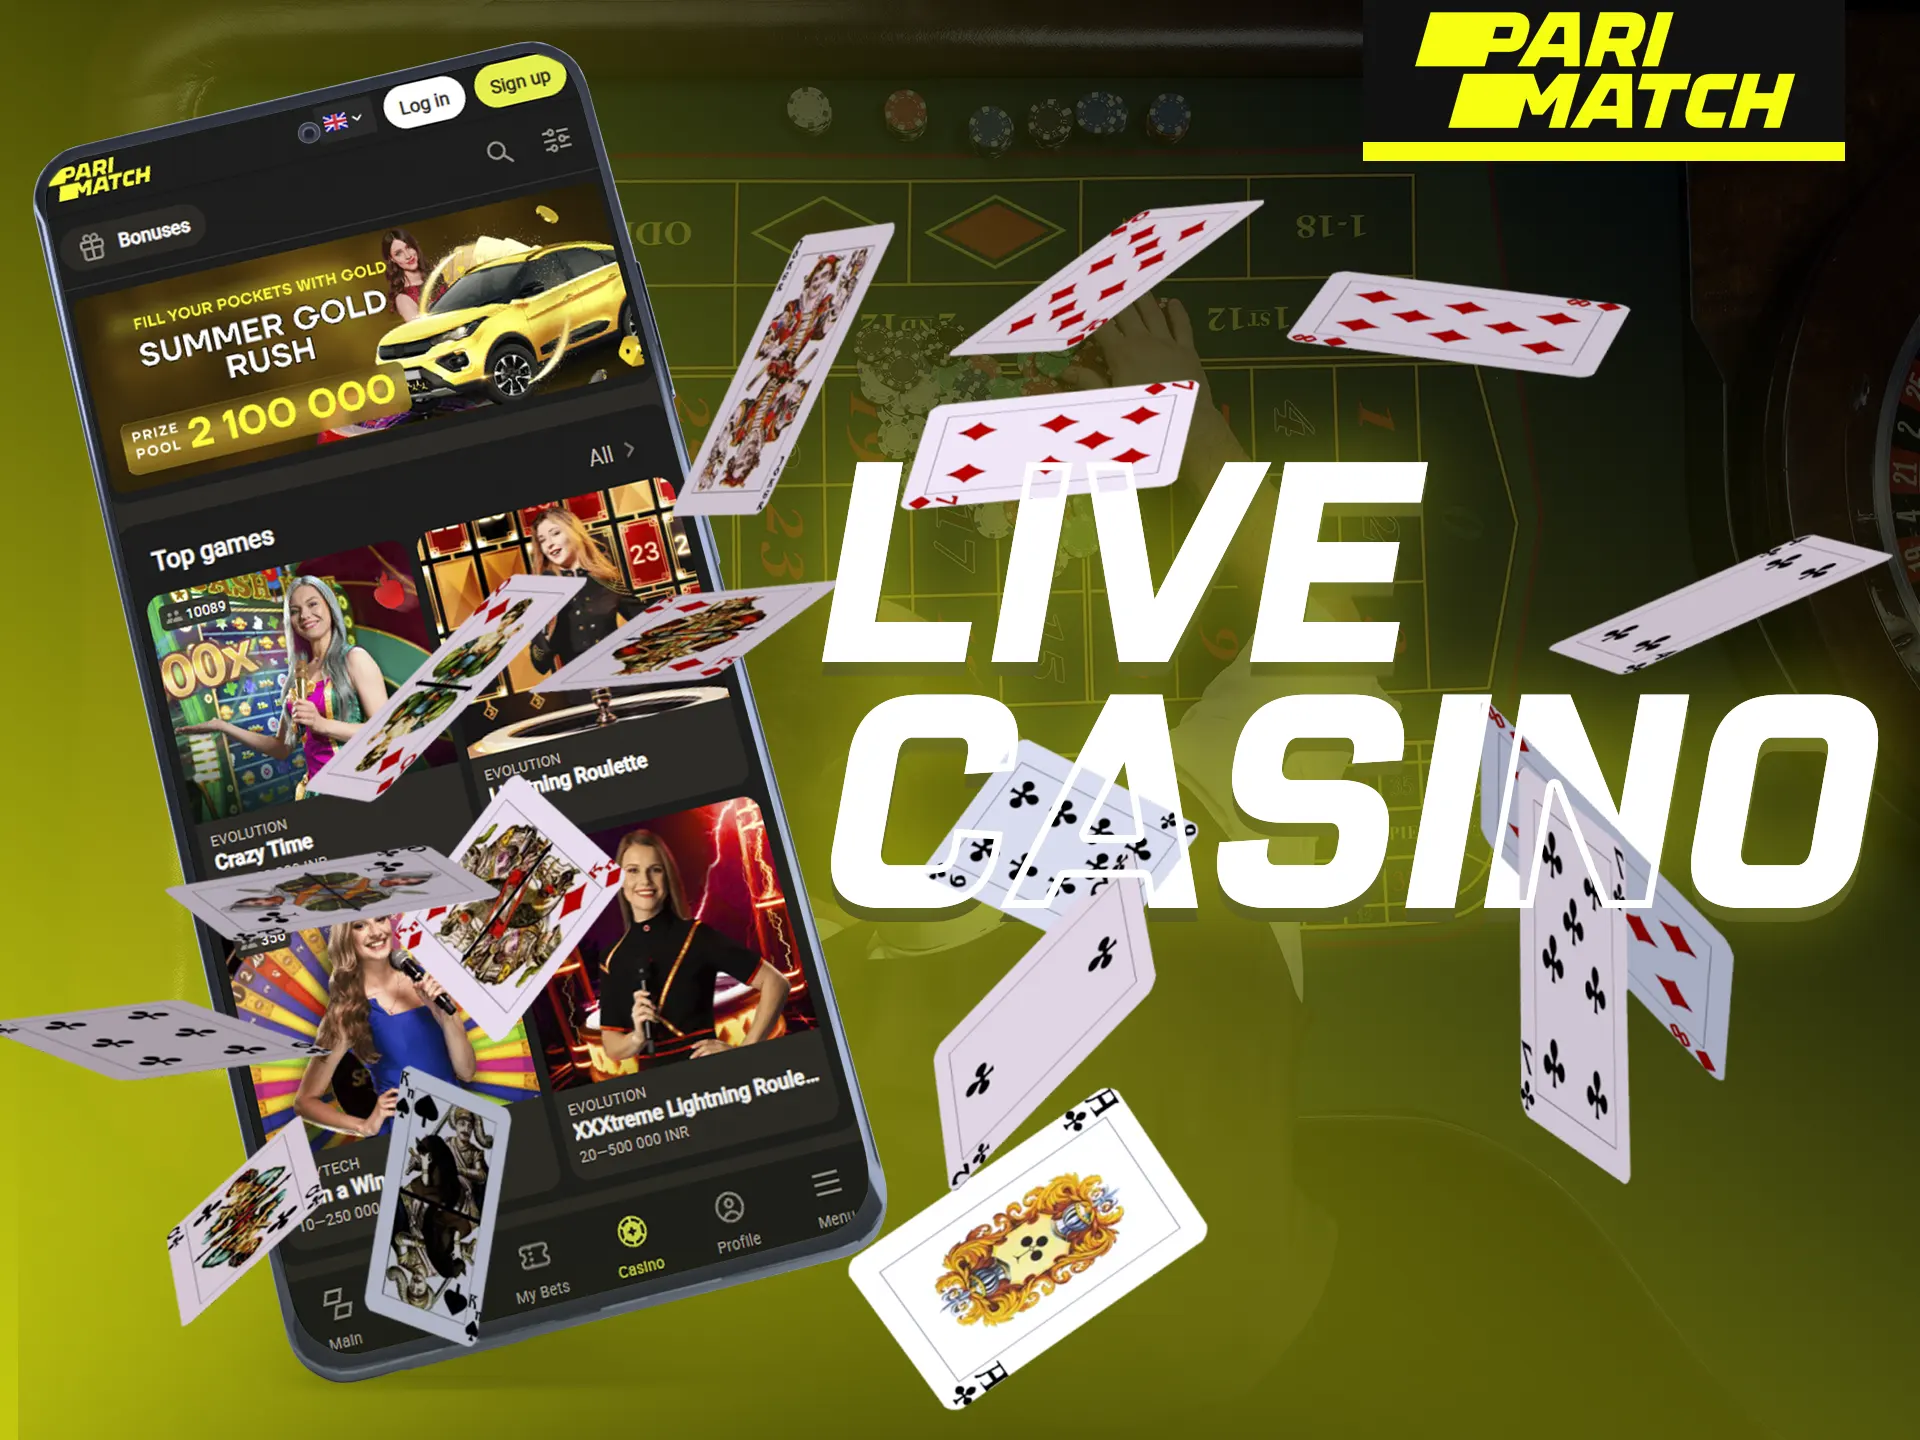 The Live Casino is tailored for mobile devices, allowing players to participate in the action at any time and from any location.